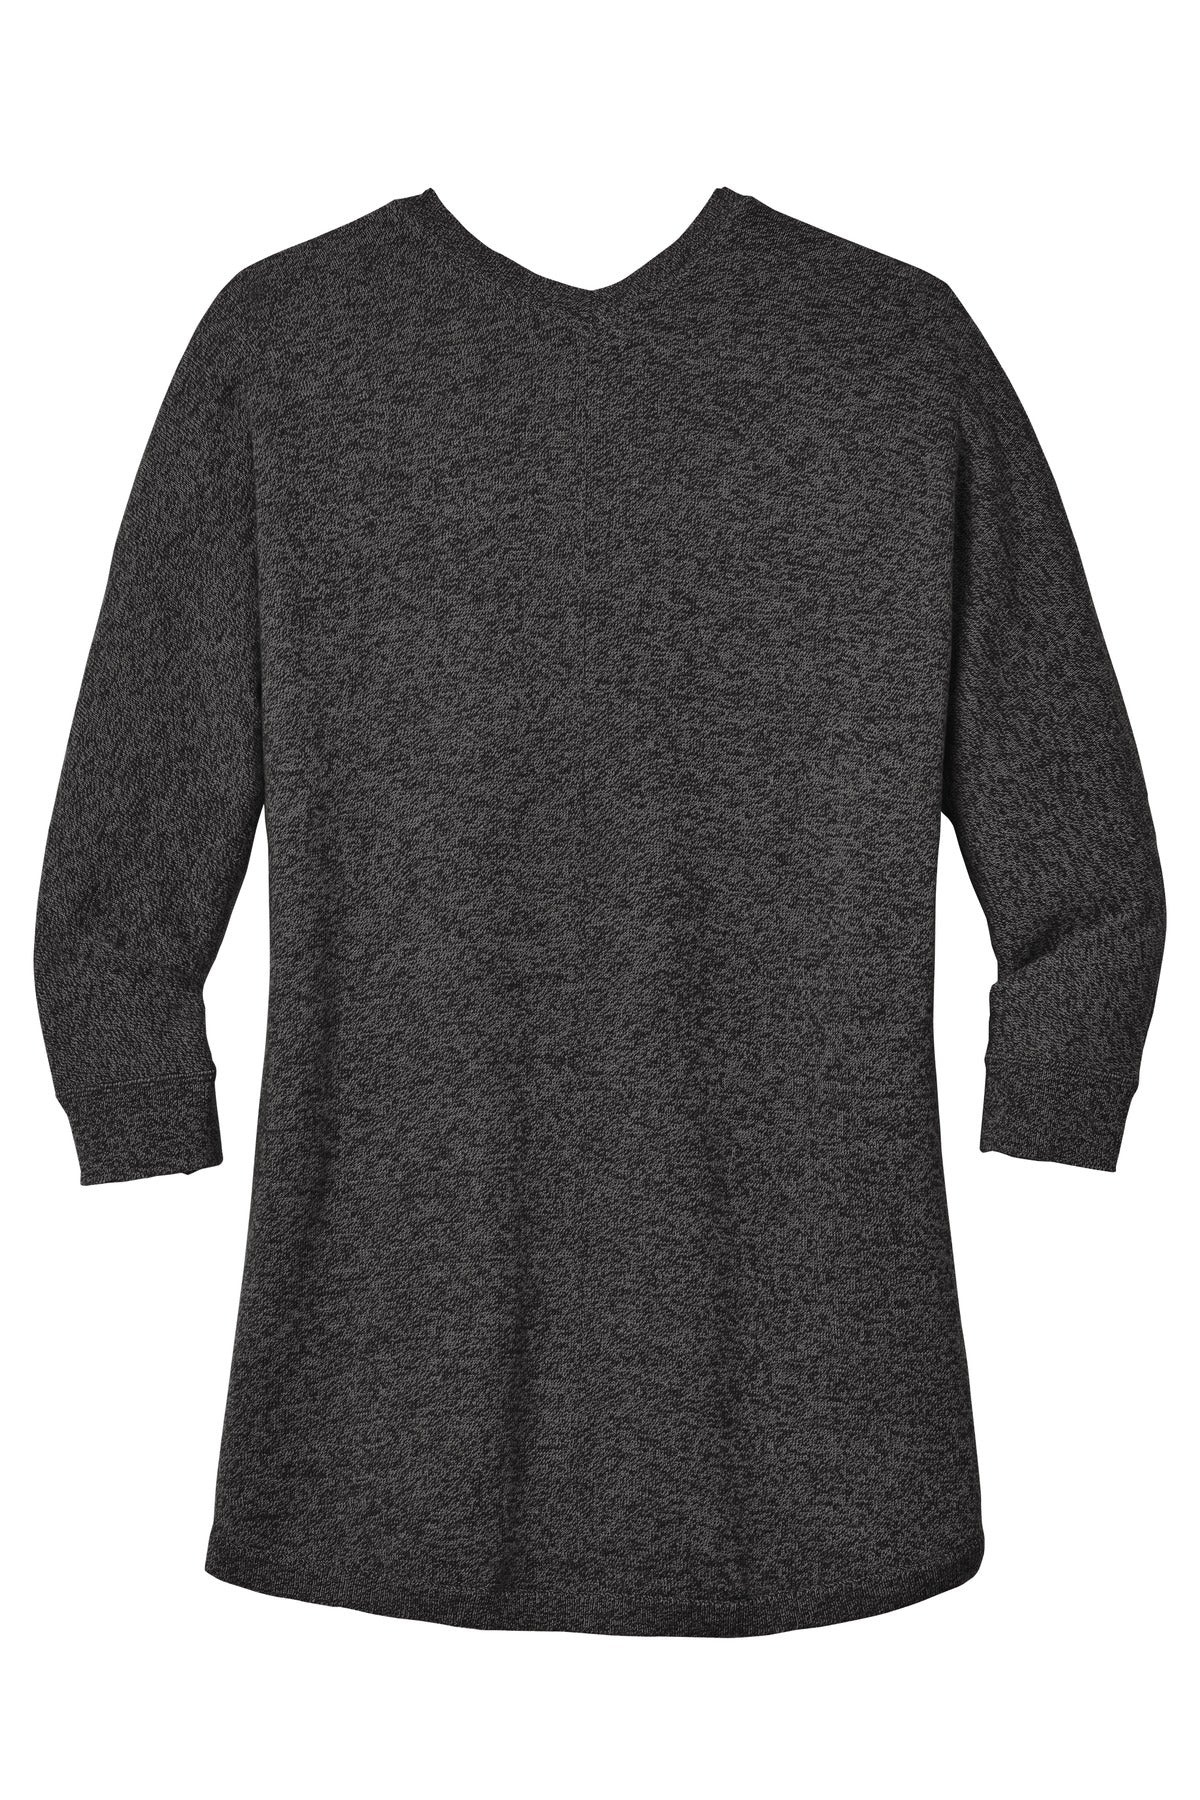 Port Authority Ladies Marled Cocoon Sweater. LSW416